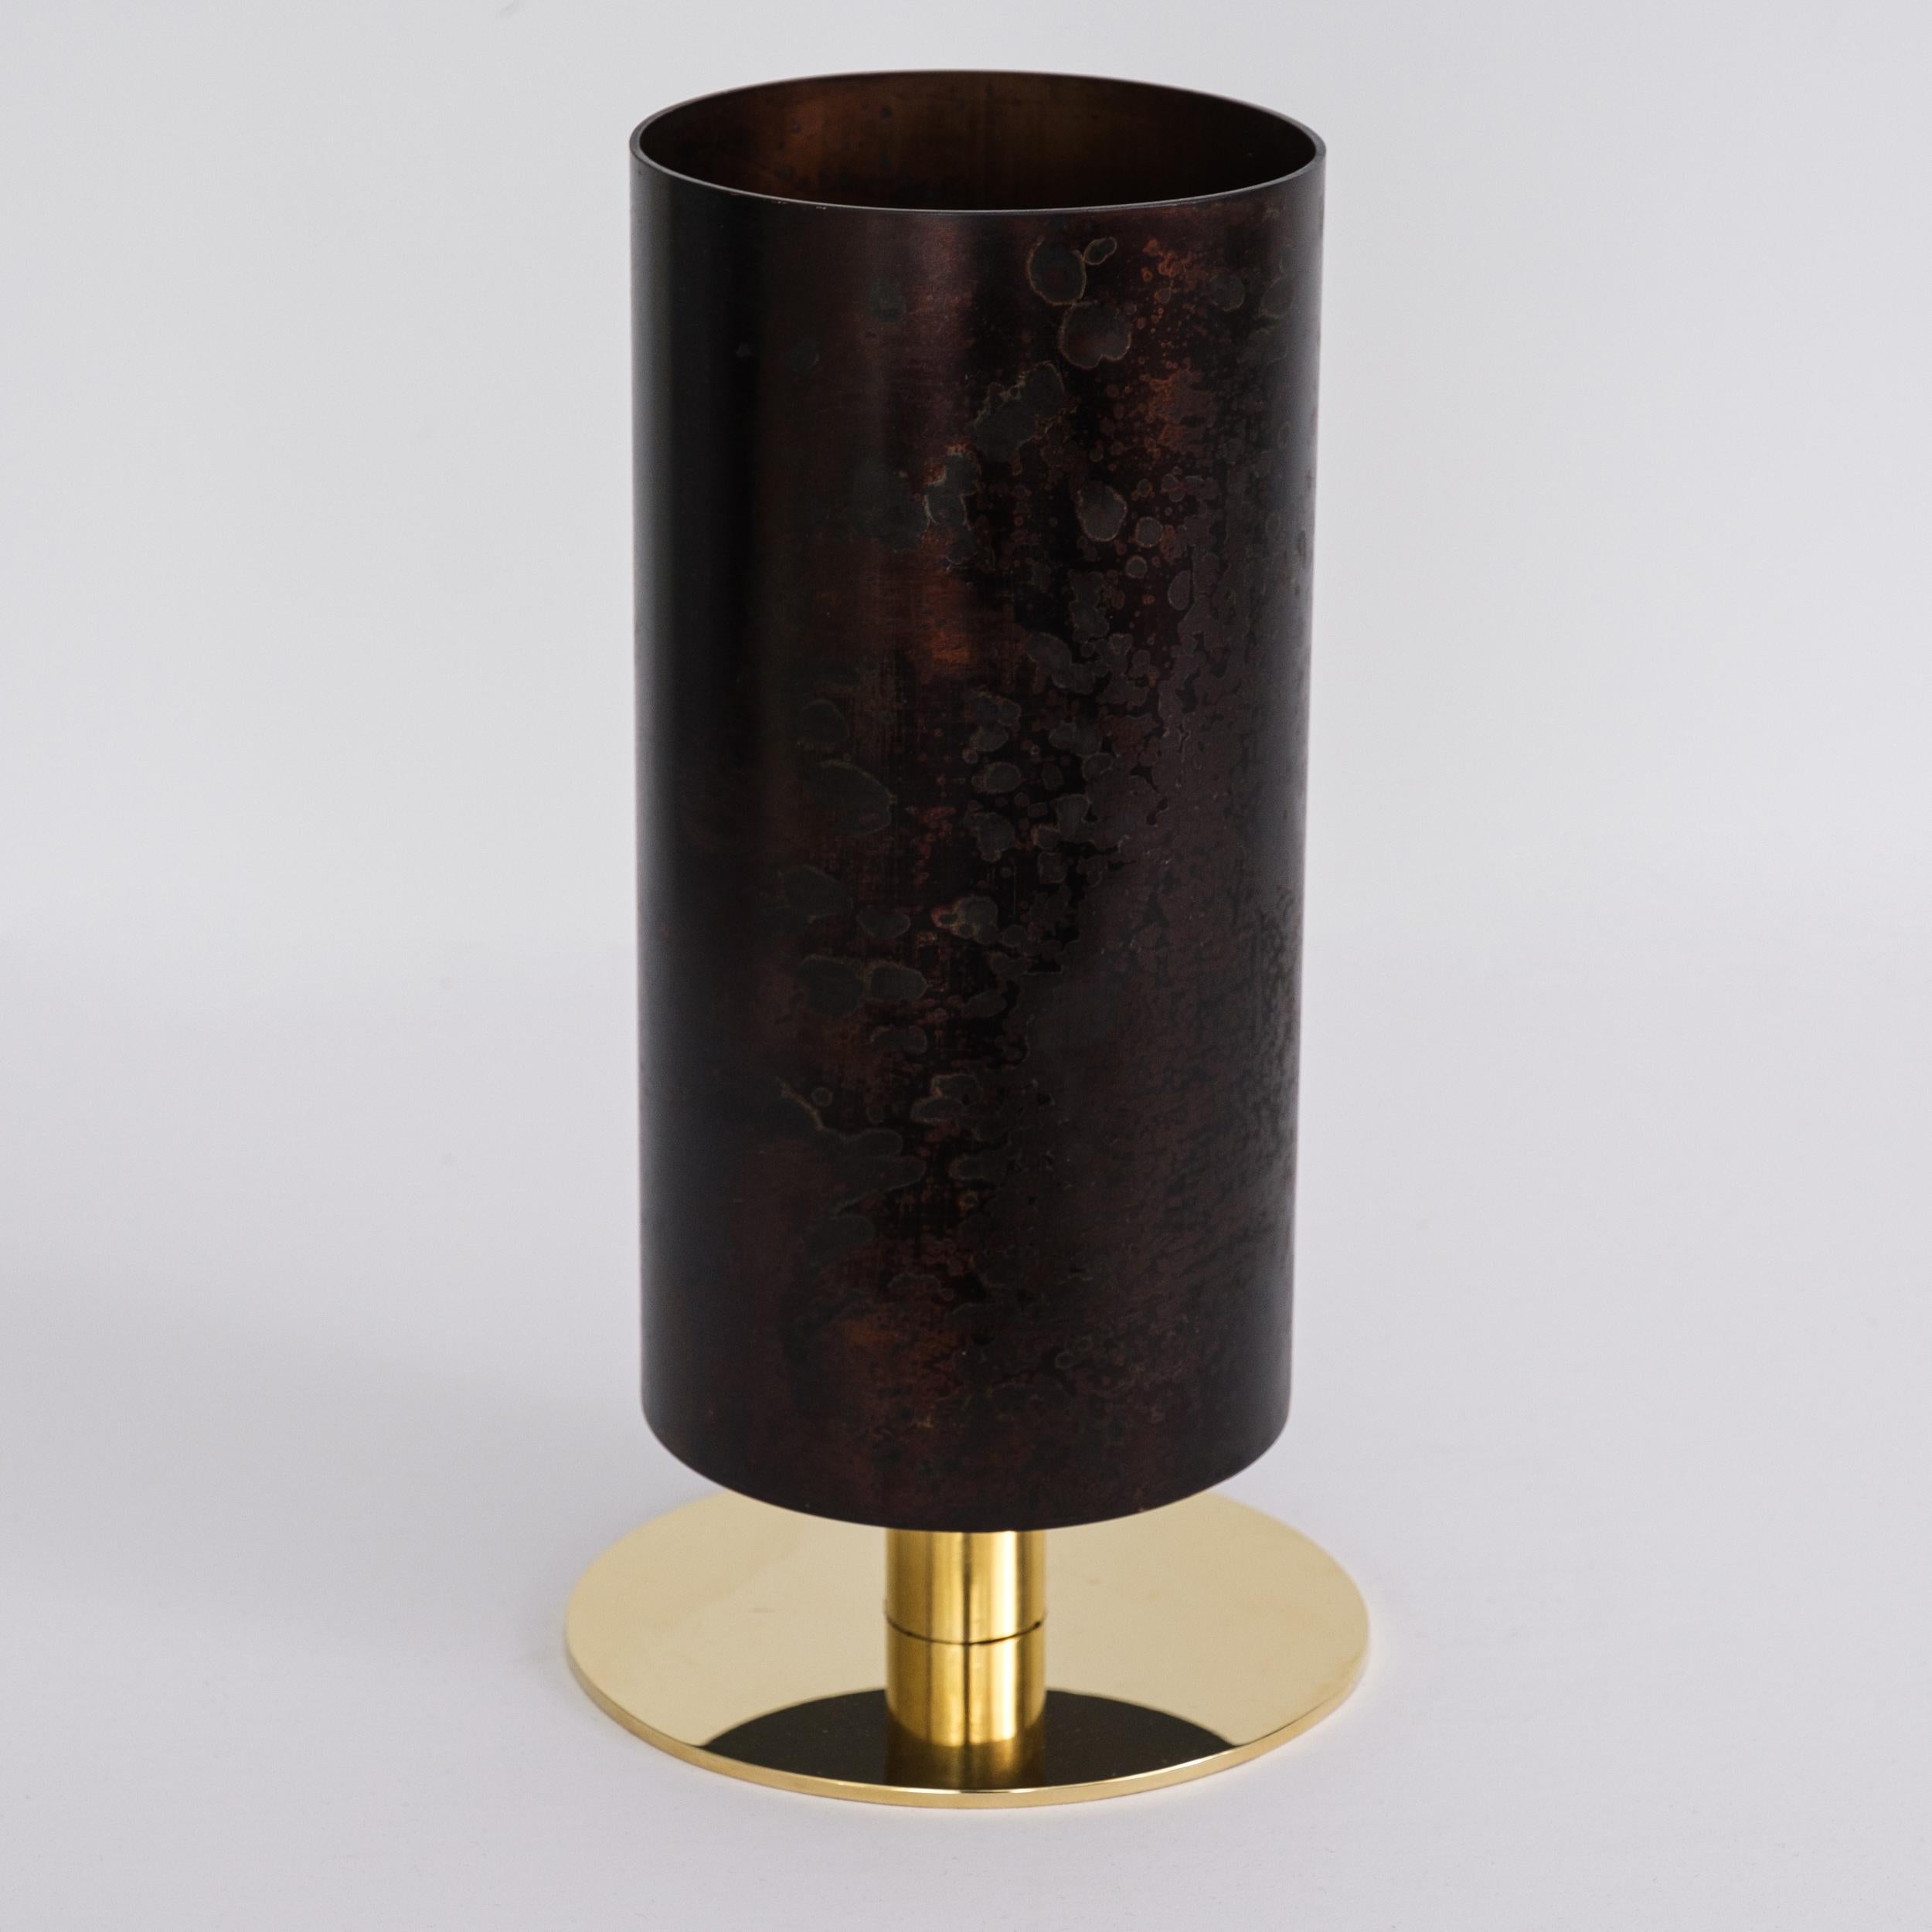 Carl Auböck Model #7247-6 patinated brass vase. Designed in the 1950s, this incredibly refined and sculptural Viennese vase is executed in polished and darkly patinated brass by Werkstätte Carl Auböck, Austria. 

Price is per item. Available in